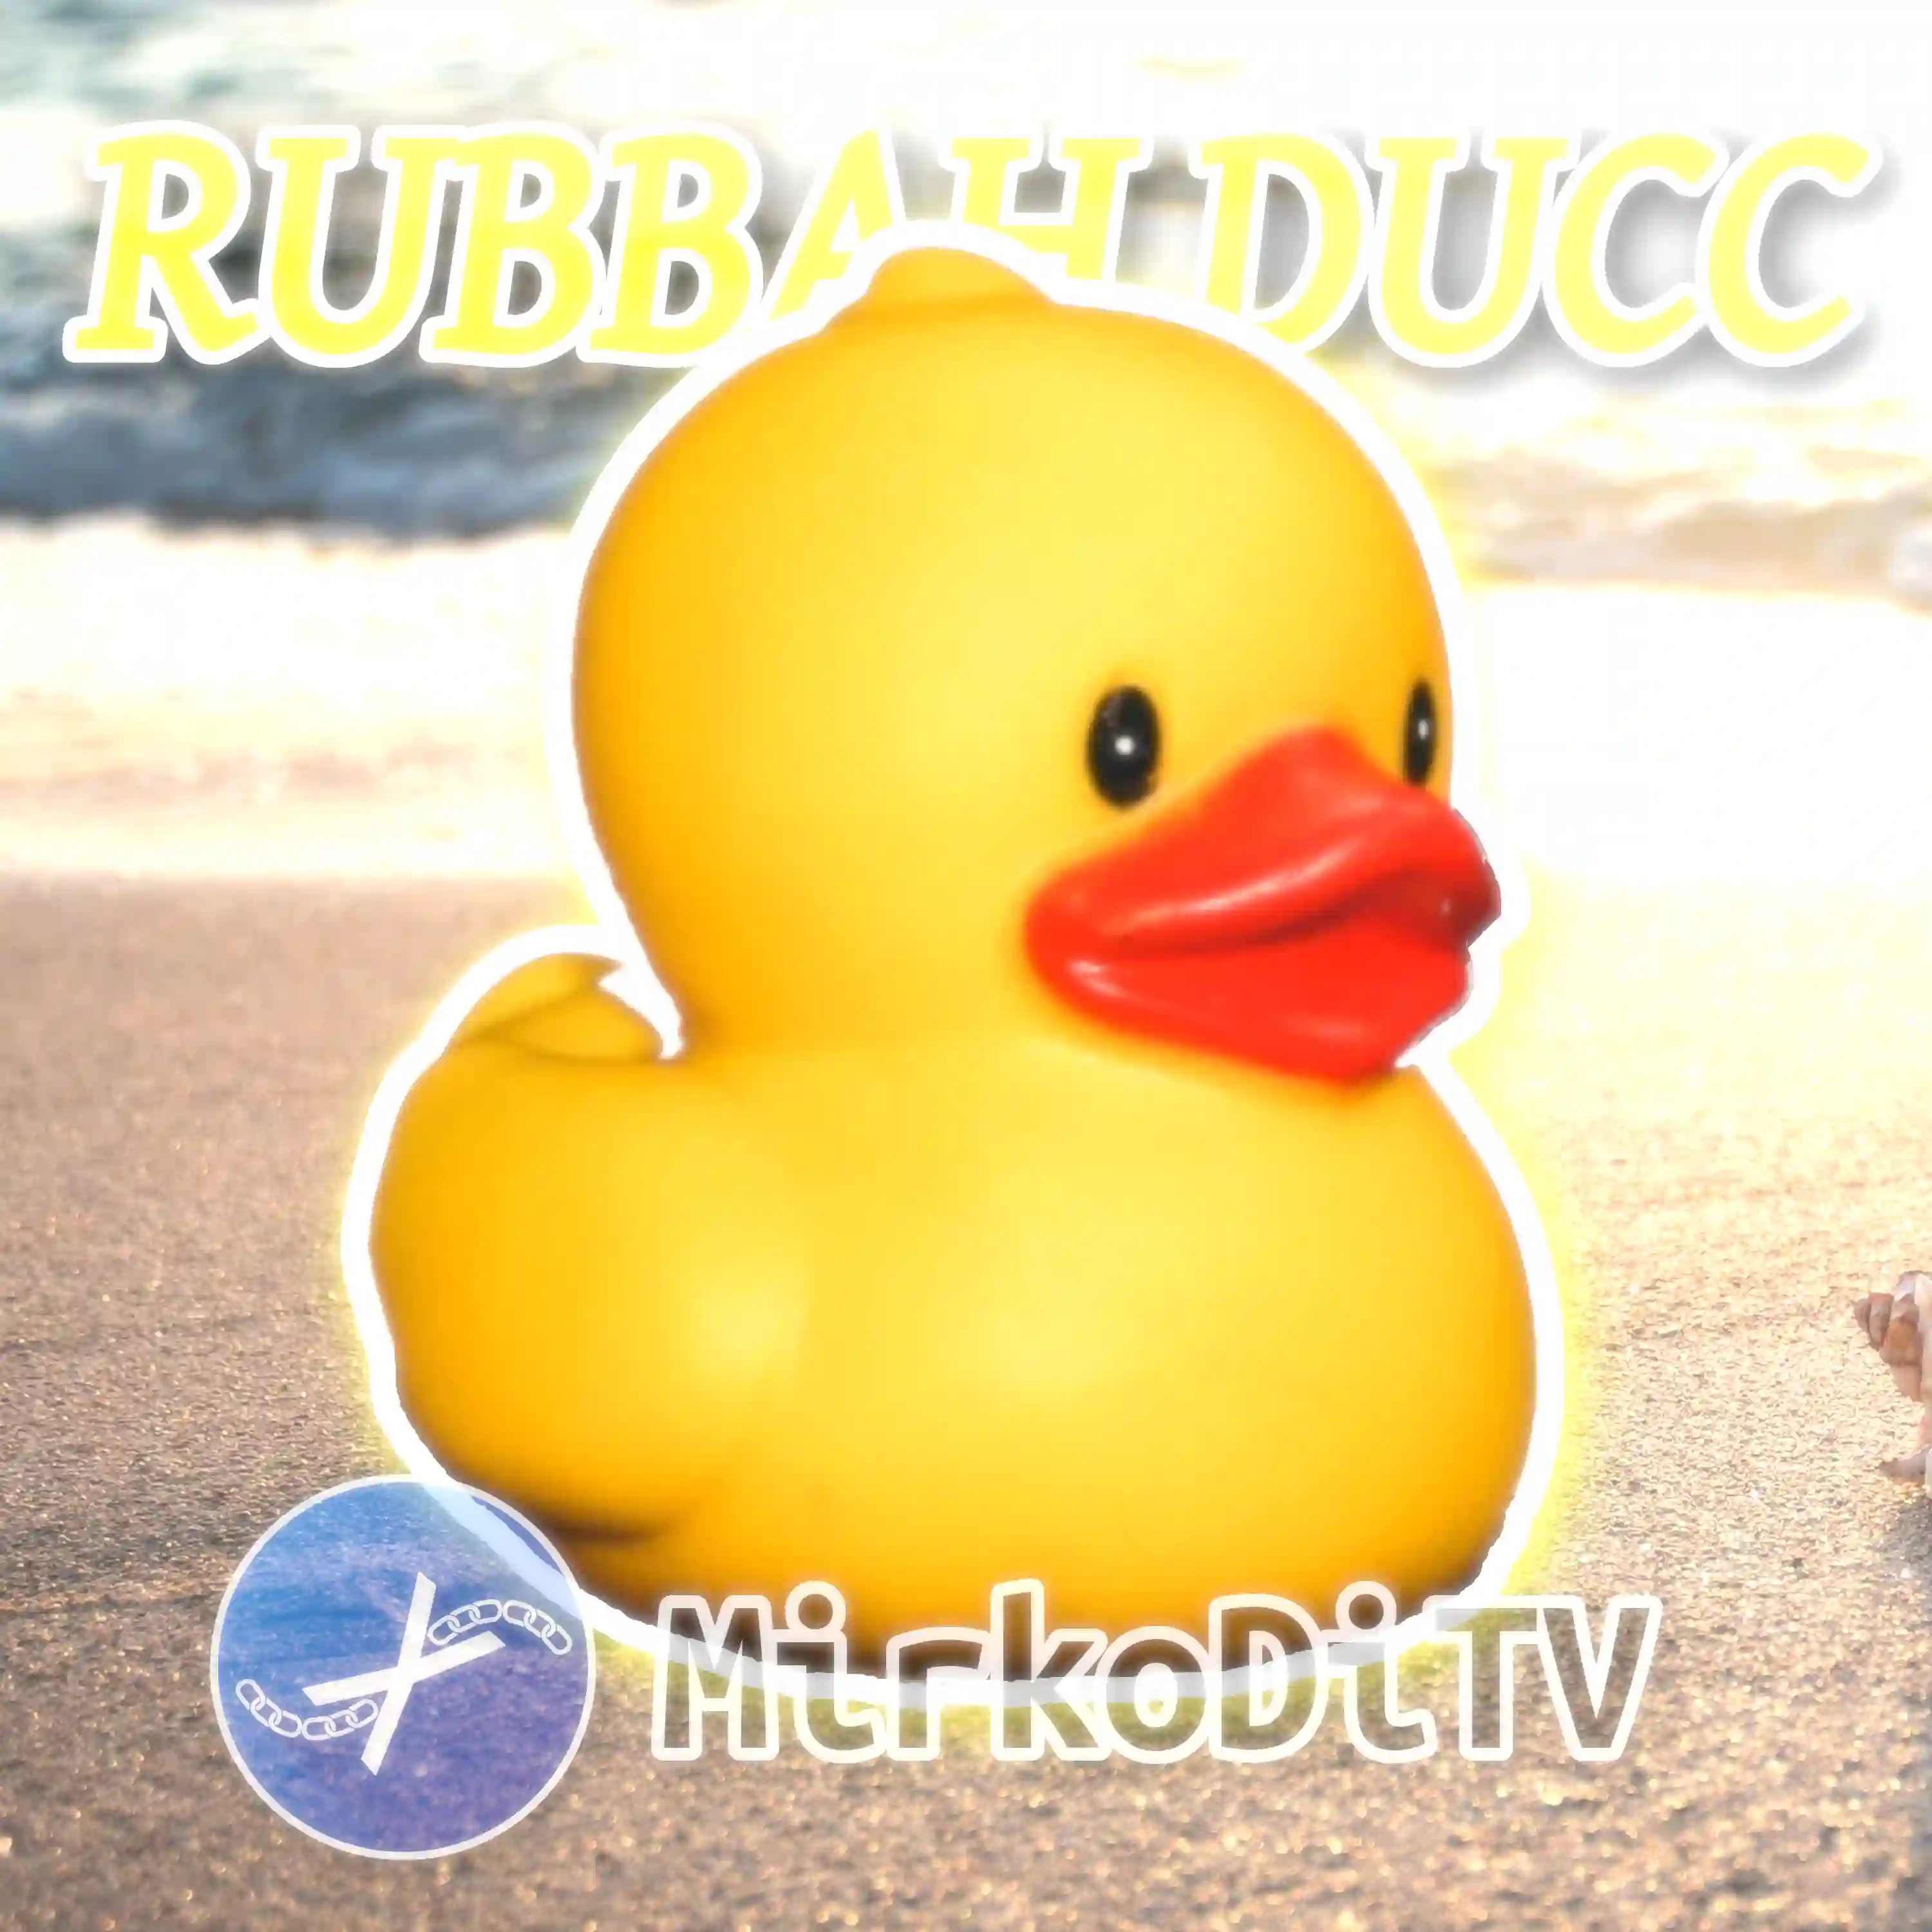 A yellow rubber duck at the beach. Song title and artist name are, respectively, at the top and at the bottom of the image.